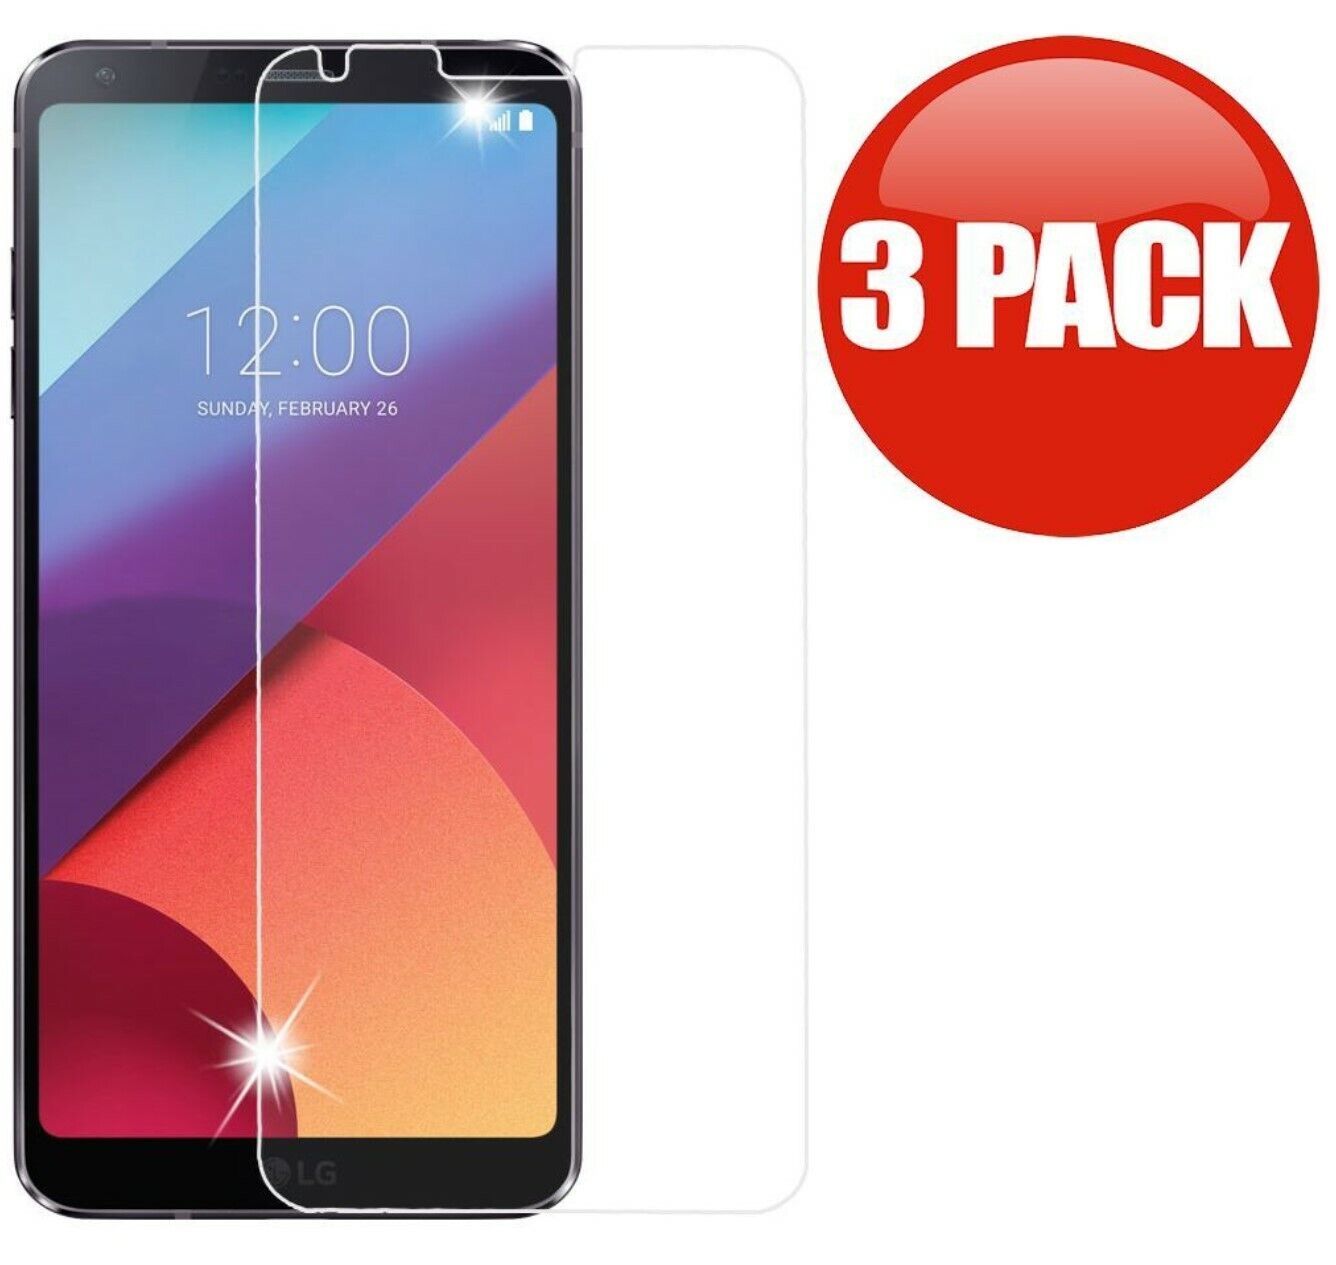 3-Pack Premium Tempered Glass Screen Protector For LG G6 Unbranded Does Not Apply